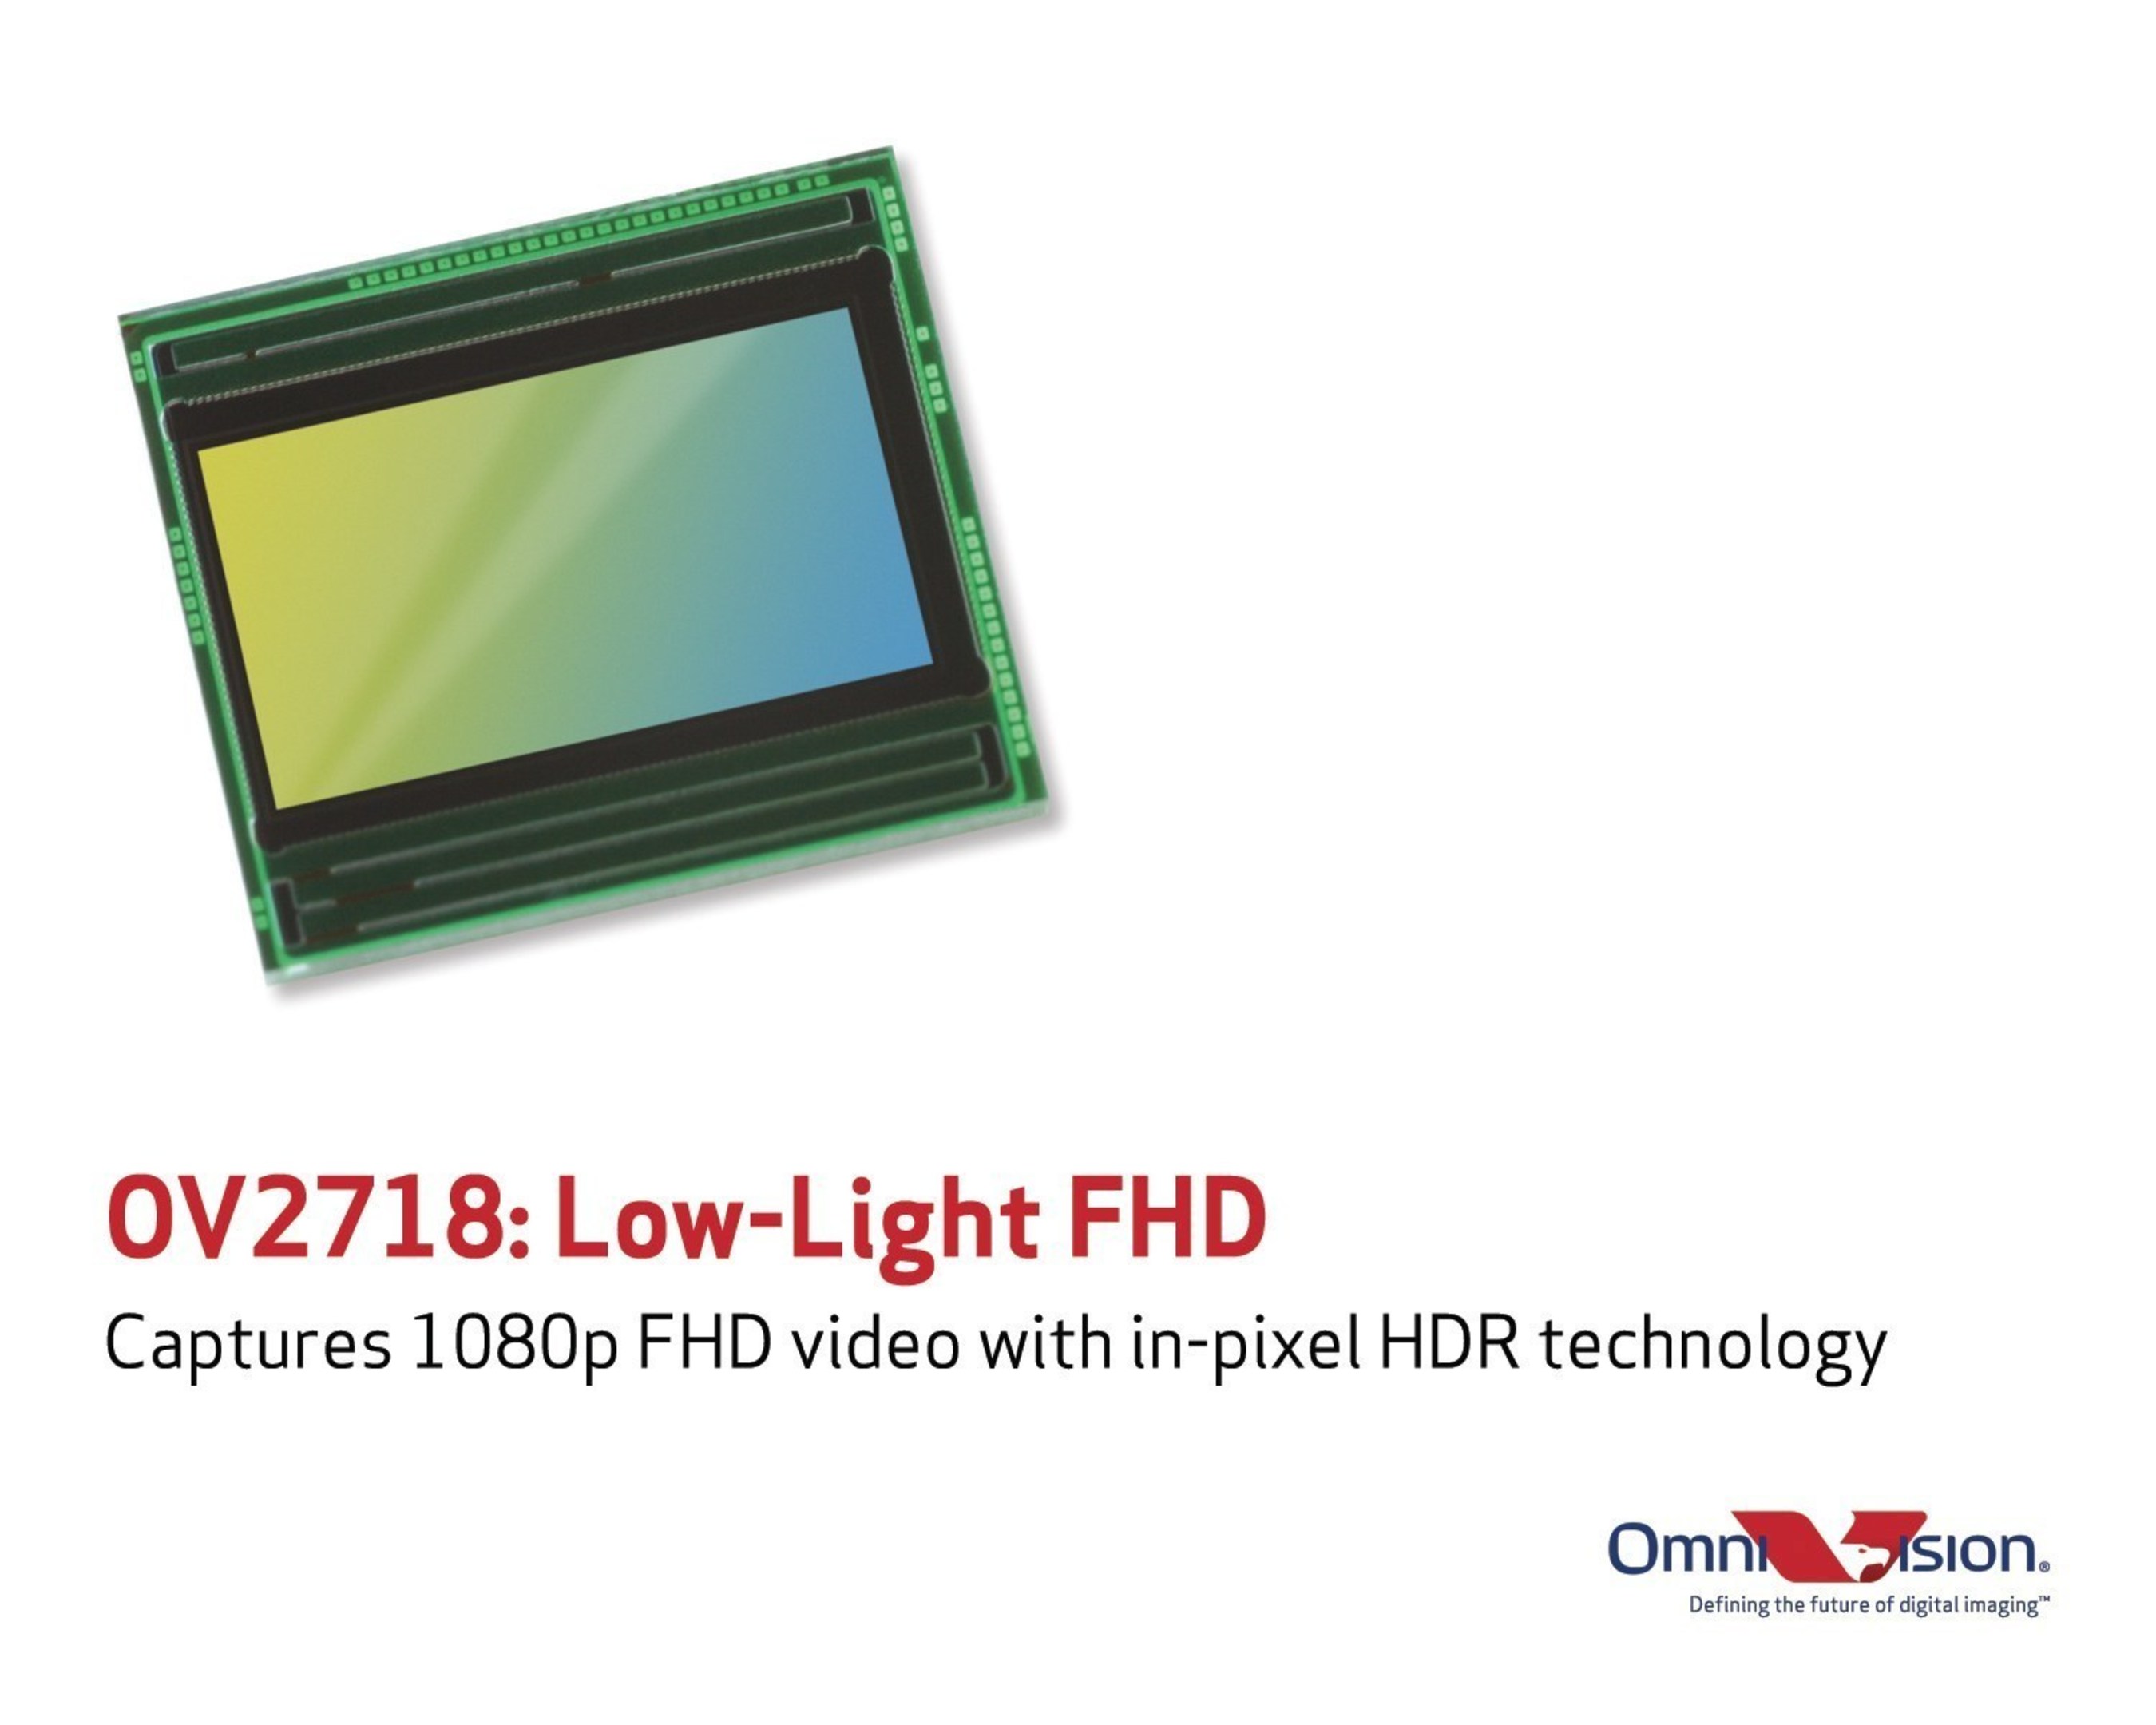 OV2718 brings best-in-class low light sensitivity and full high definition video to mainstream security applications.